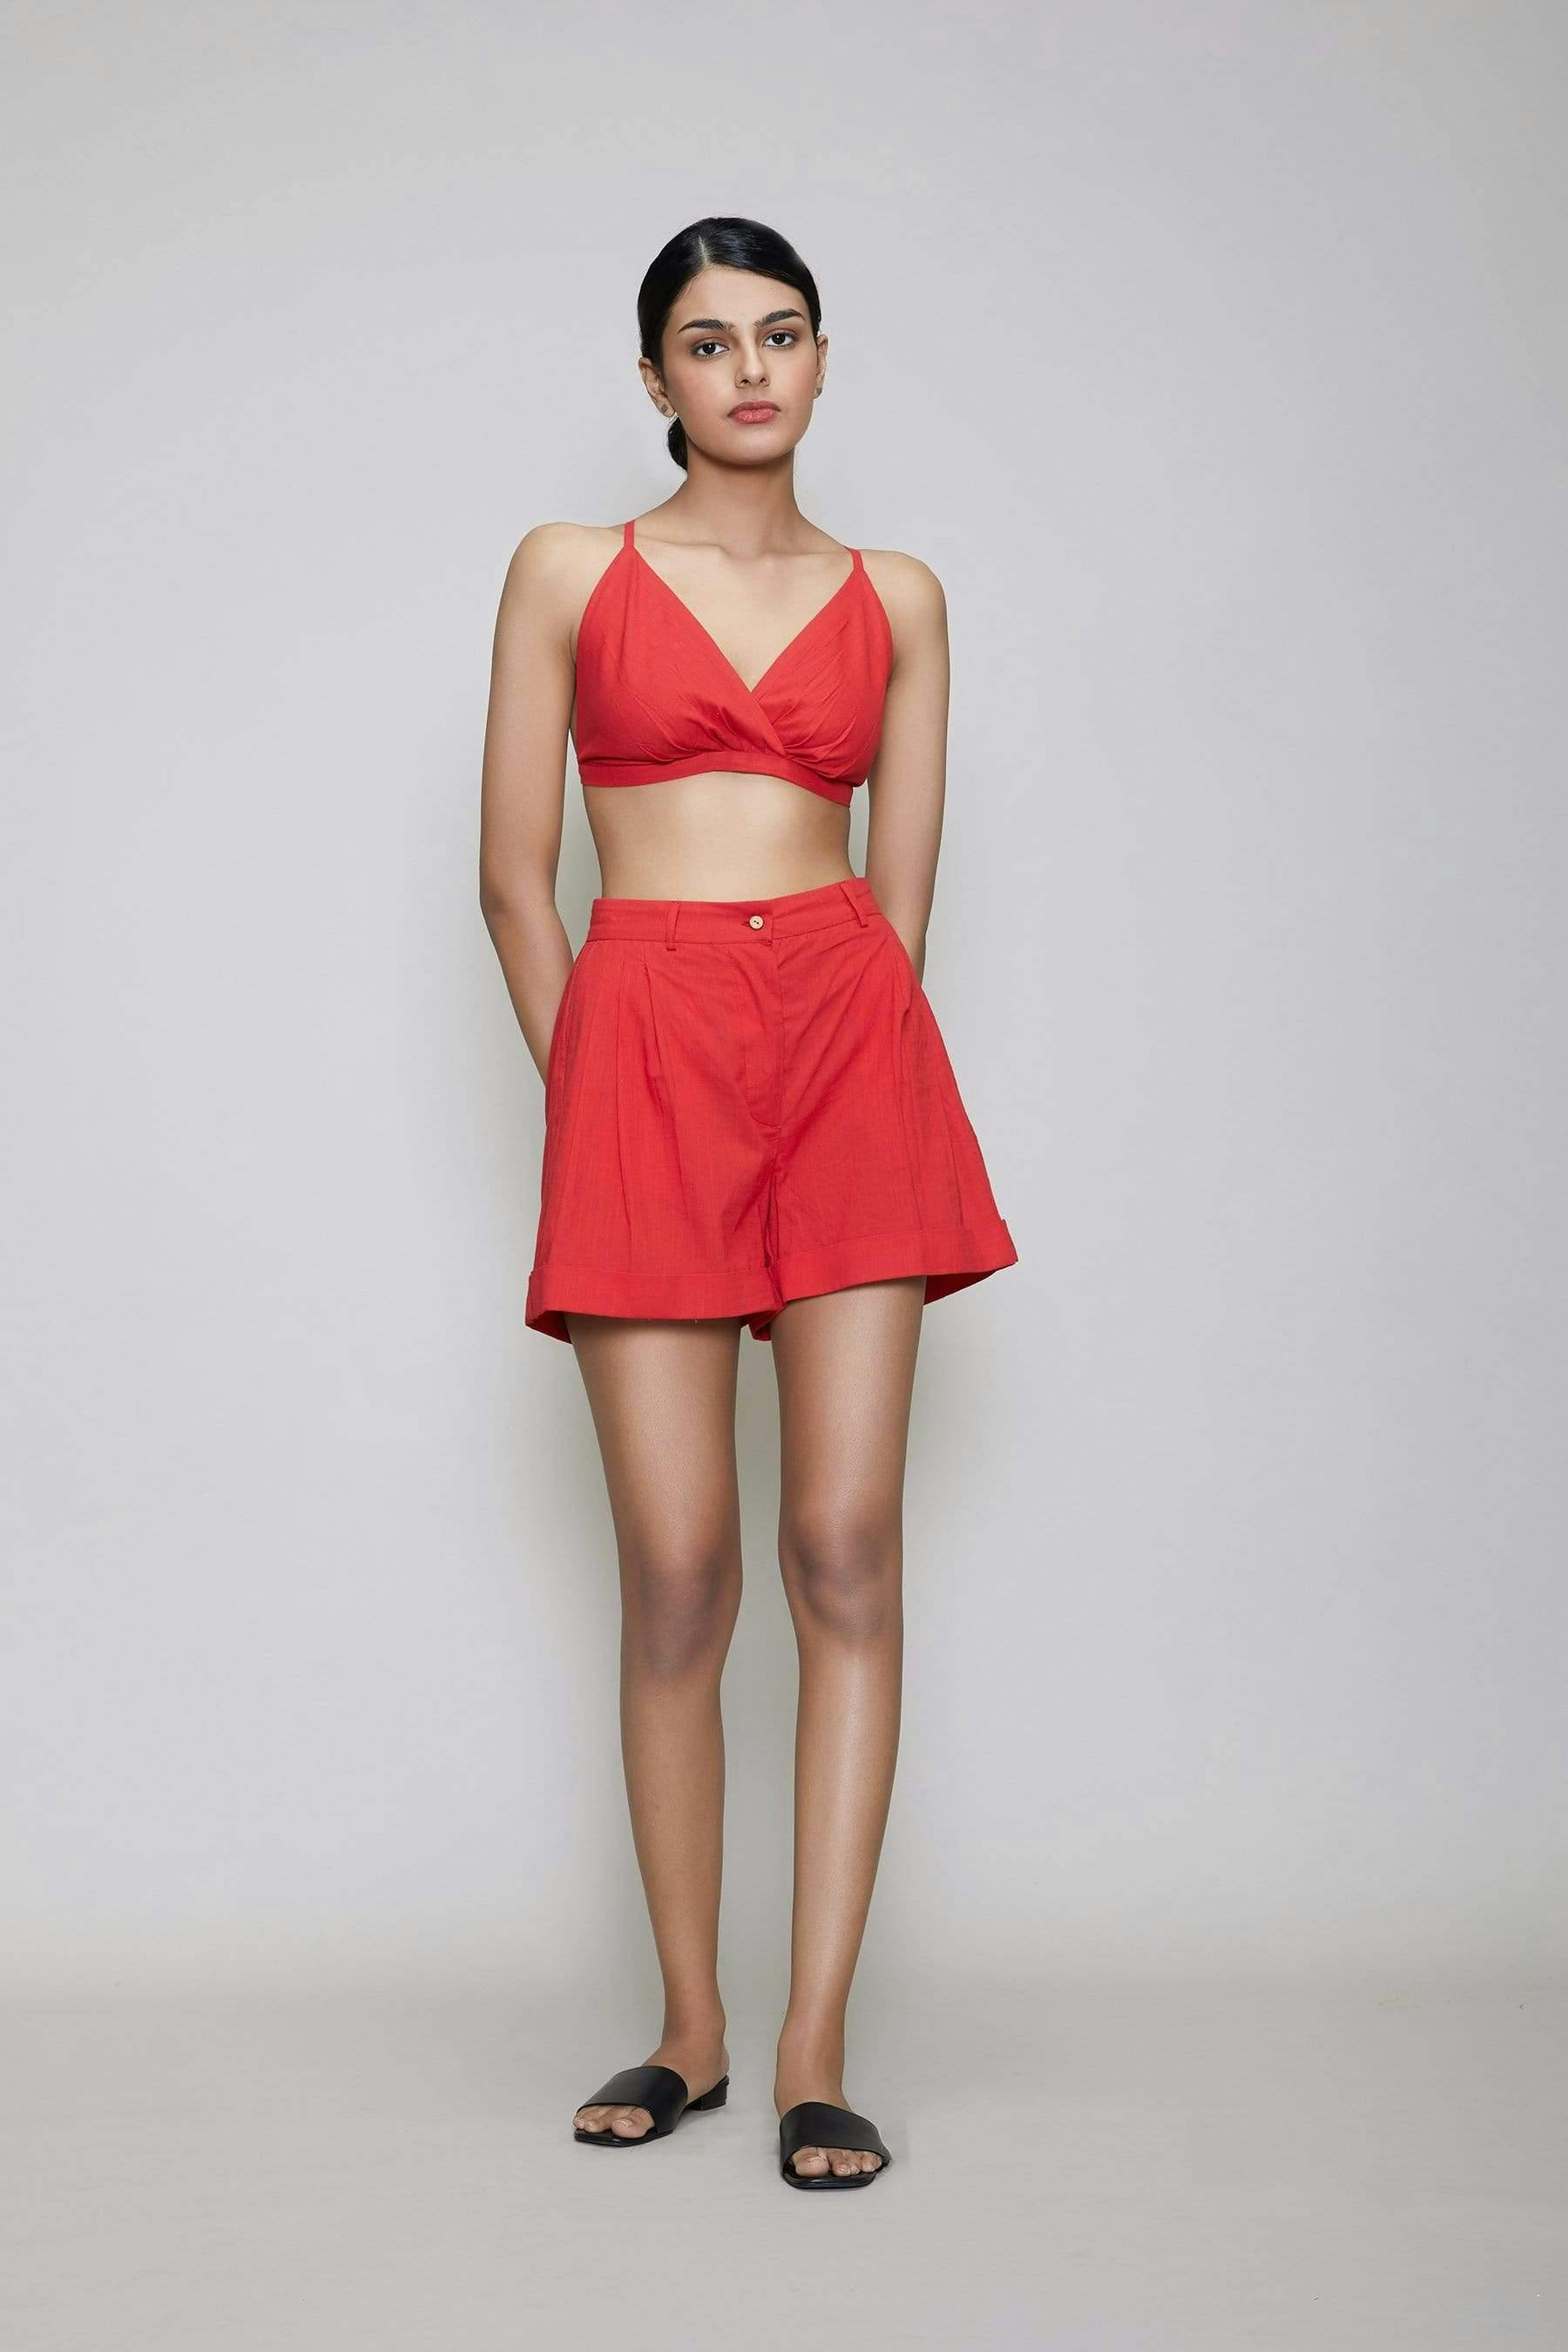 Mati Rang Bralette - Red, a product by Style Mati